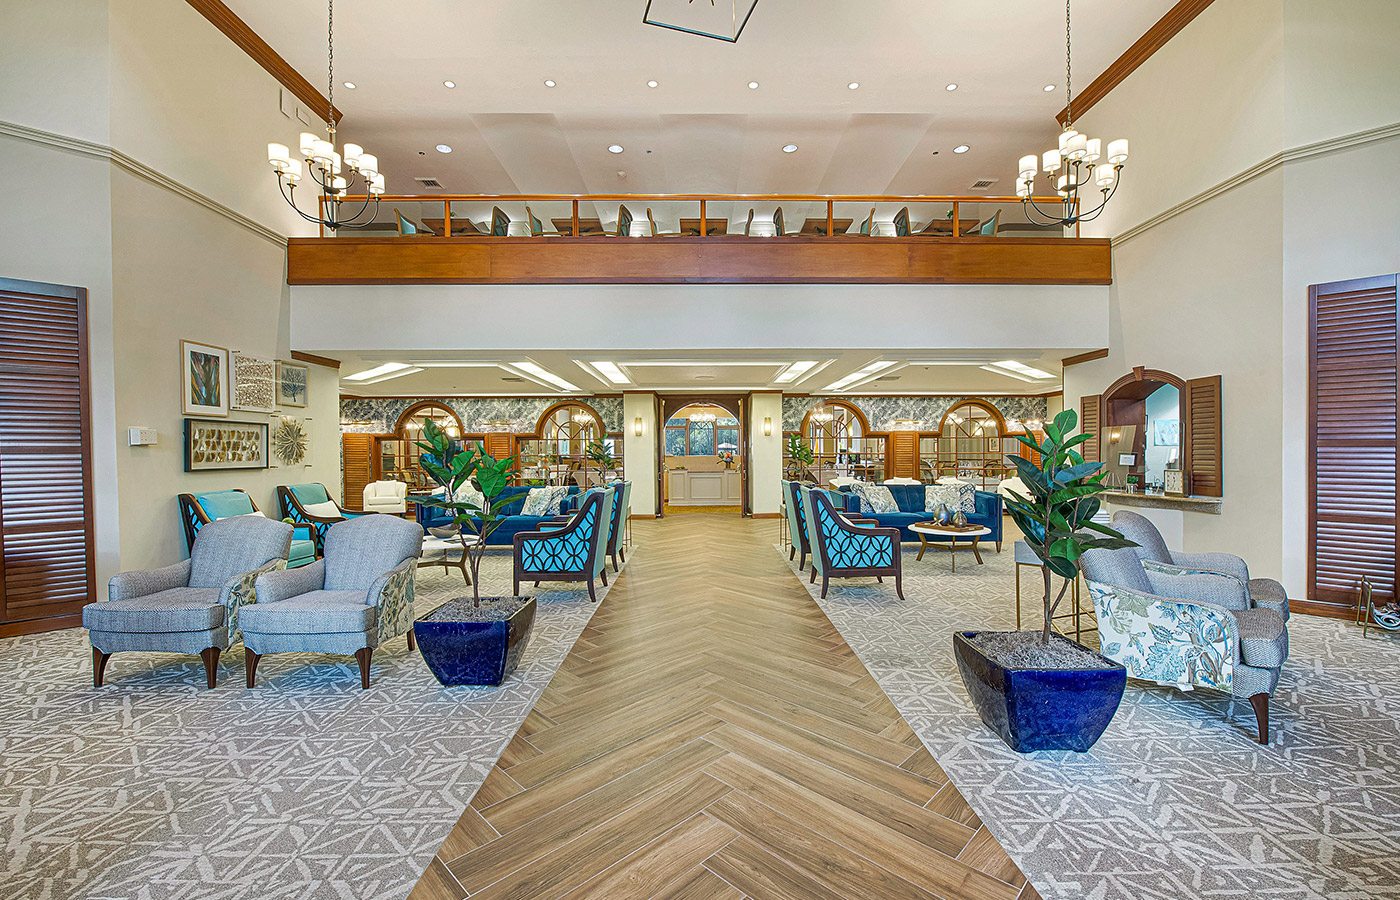 bright lobby area with seating